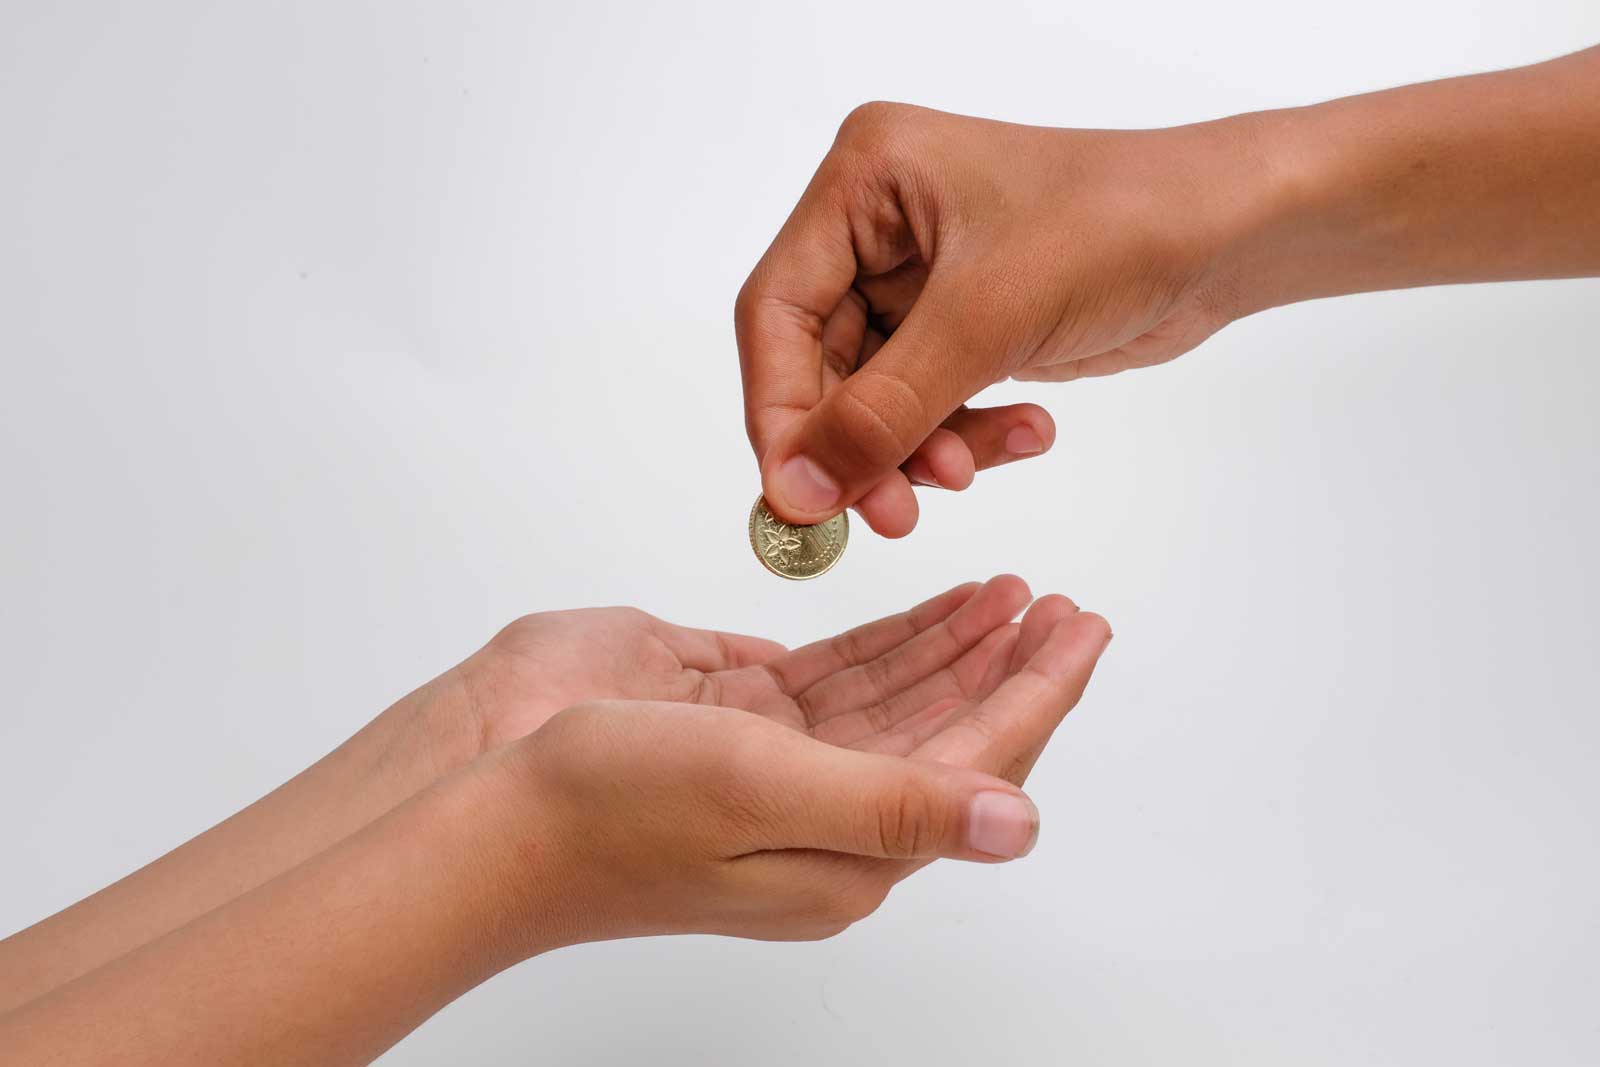 Share pay. Give money hand. Give a hand. Giving money to. Hand with Coin.